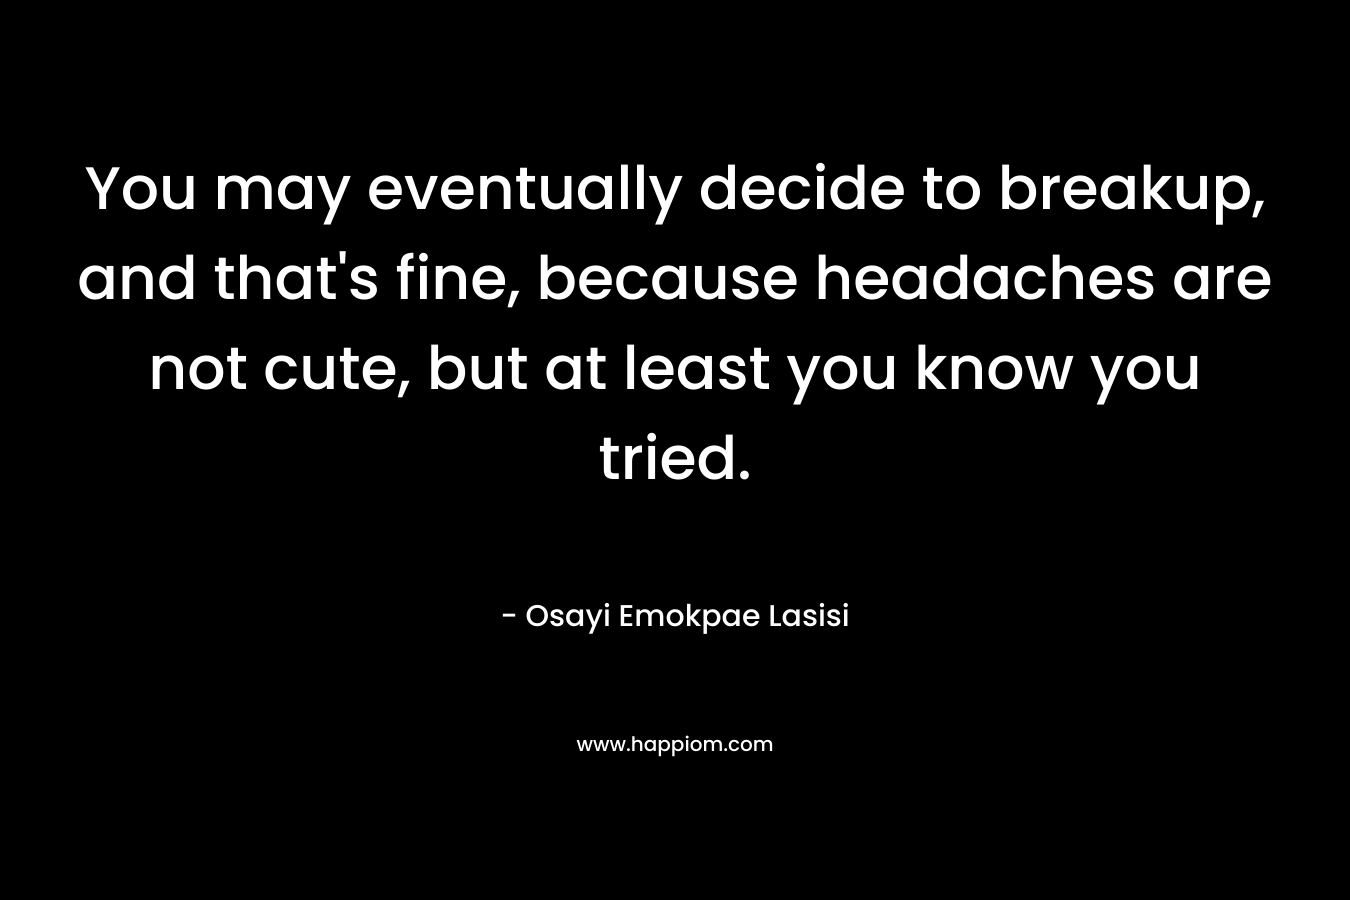 You may eventually decide to breakup, and that’s fine, because headaches are not cute, but at least you know you tried. – Osayi Emokpae Lasisi